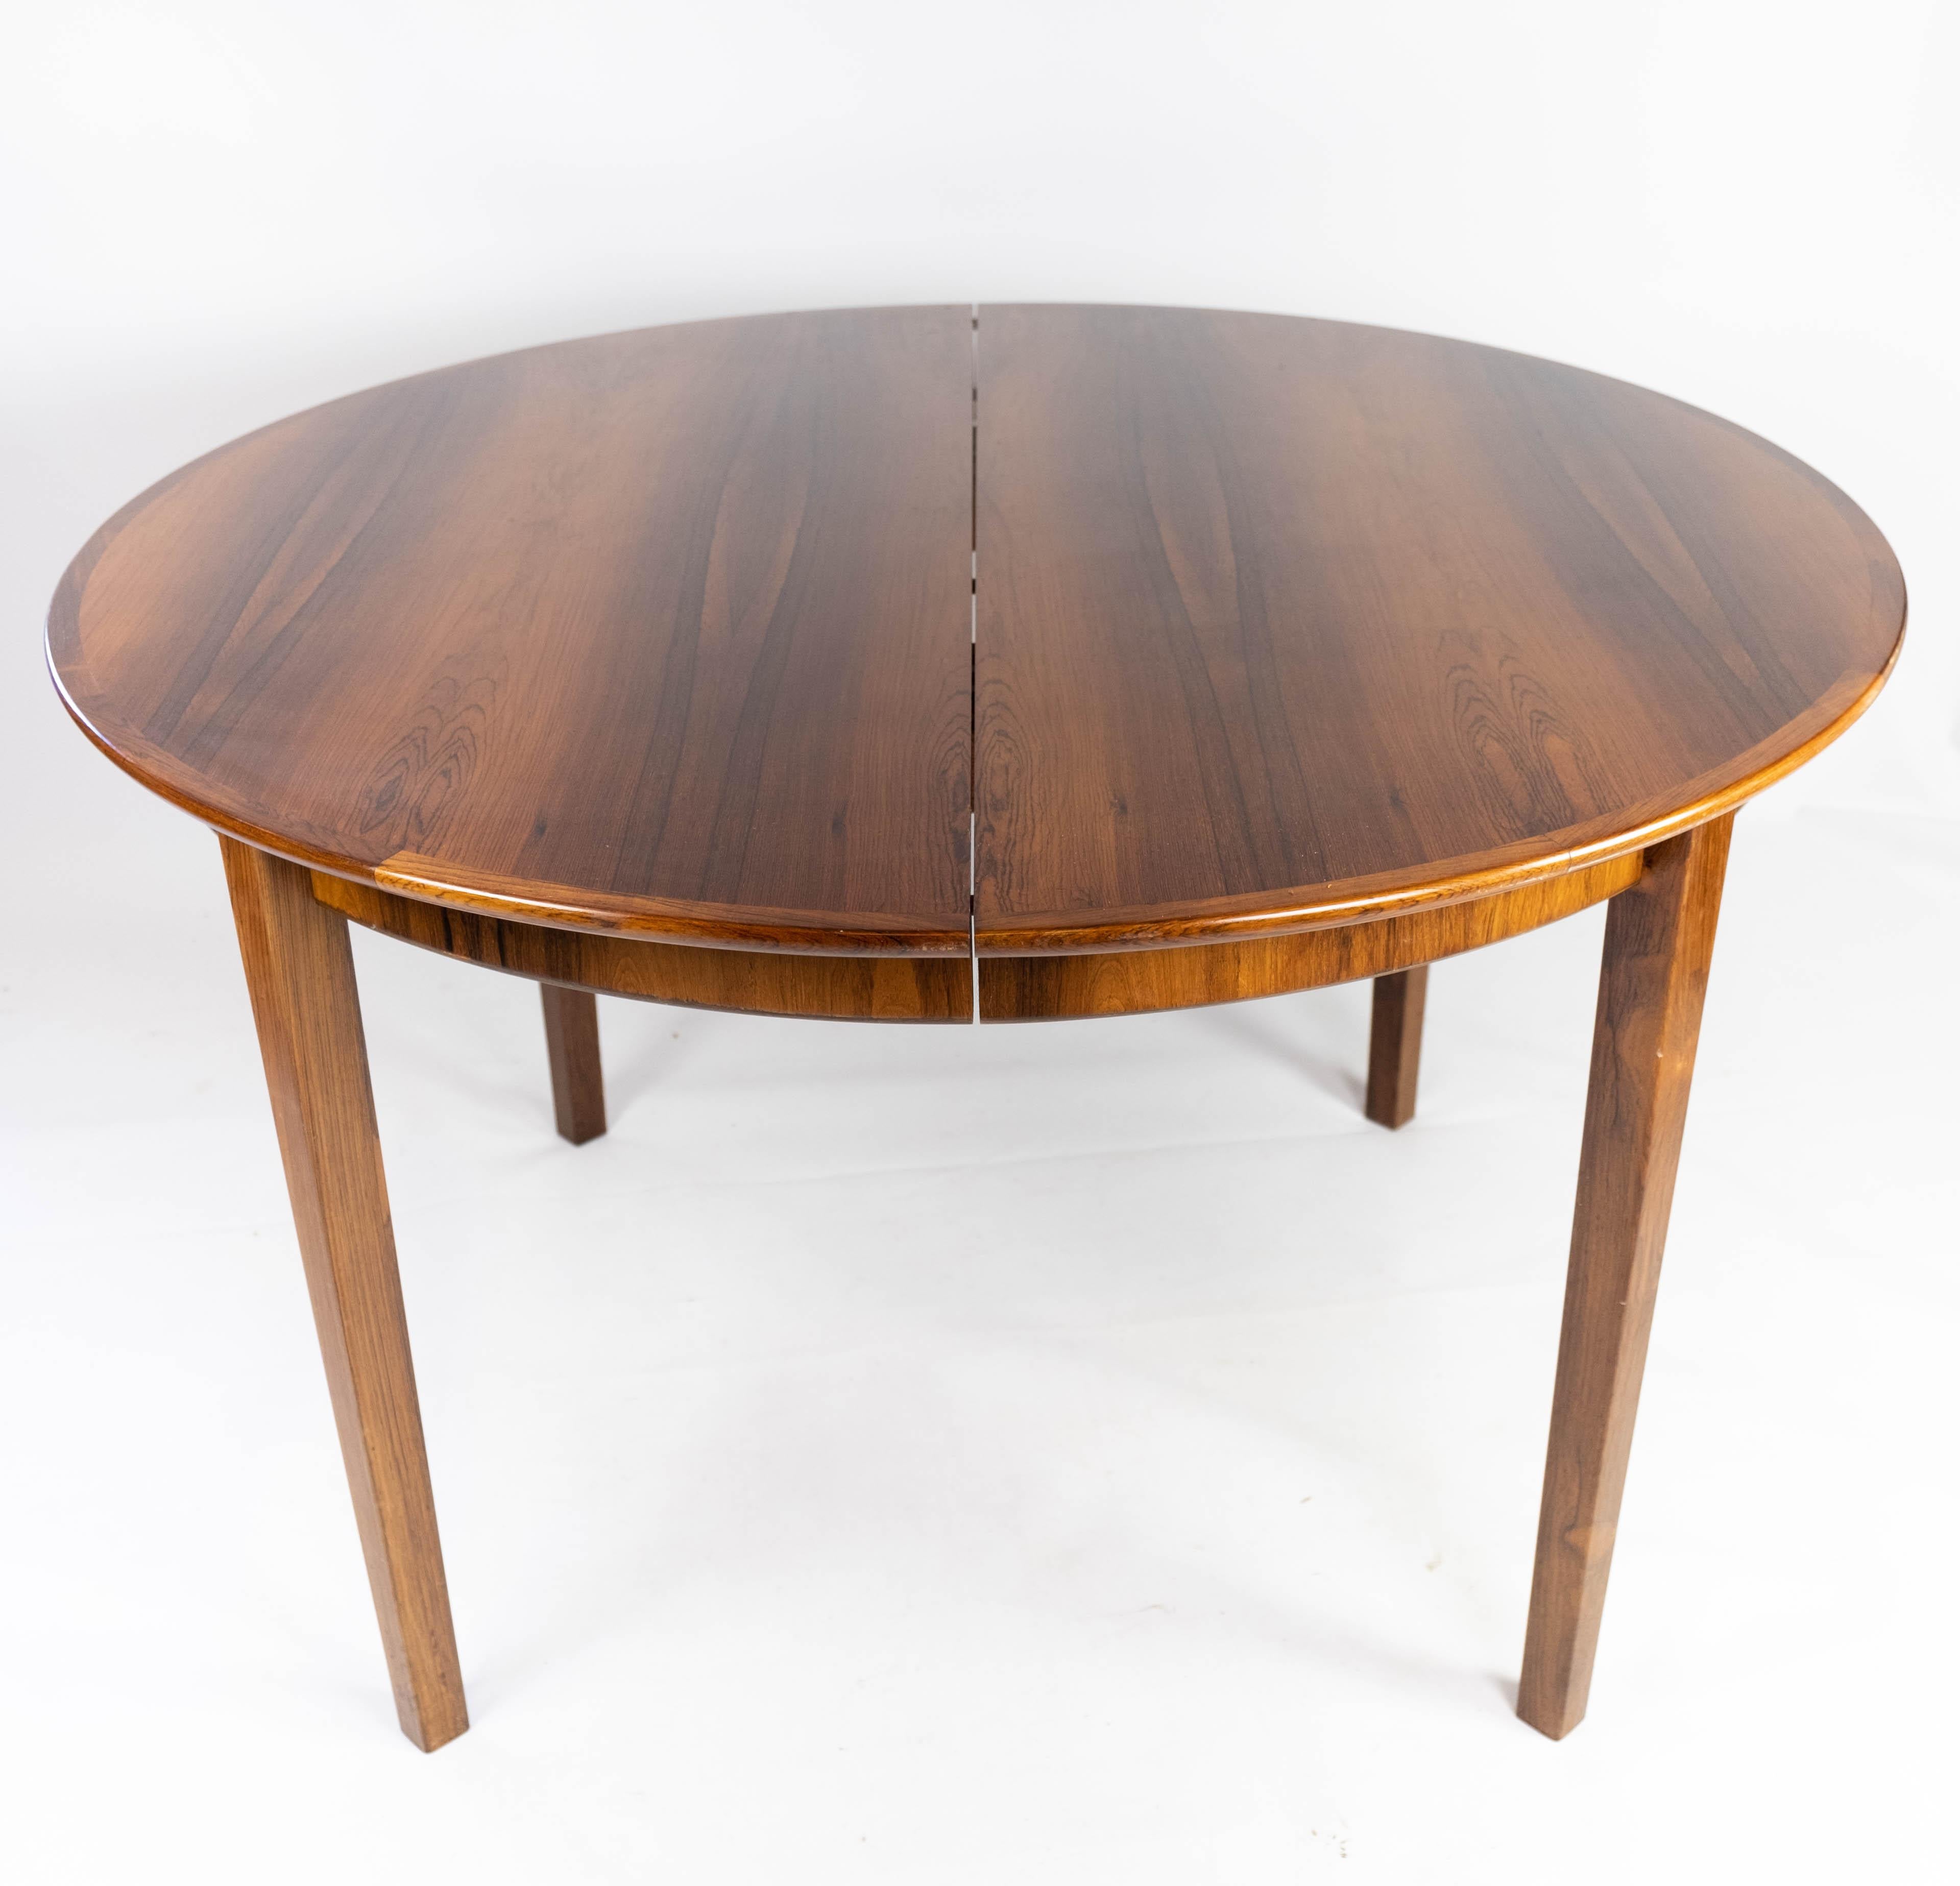 This dining table, crafted from luxurious rosewood, embodies the elegance and functionality of Danish design from the 1960s. Its sleek lines and minimalist silhouette reflect the modern aesthetic of the era, while the rich tones and intricate grain